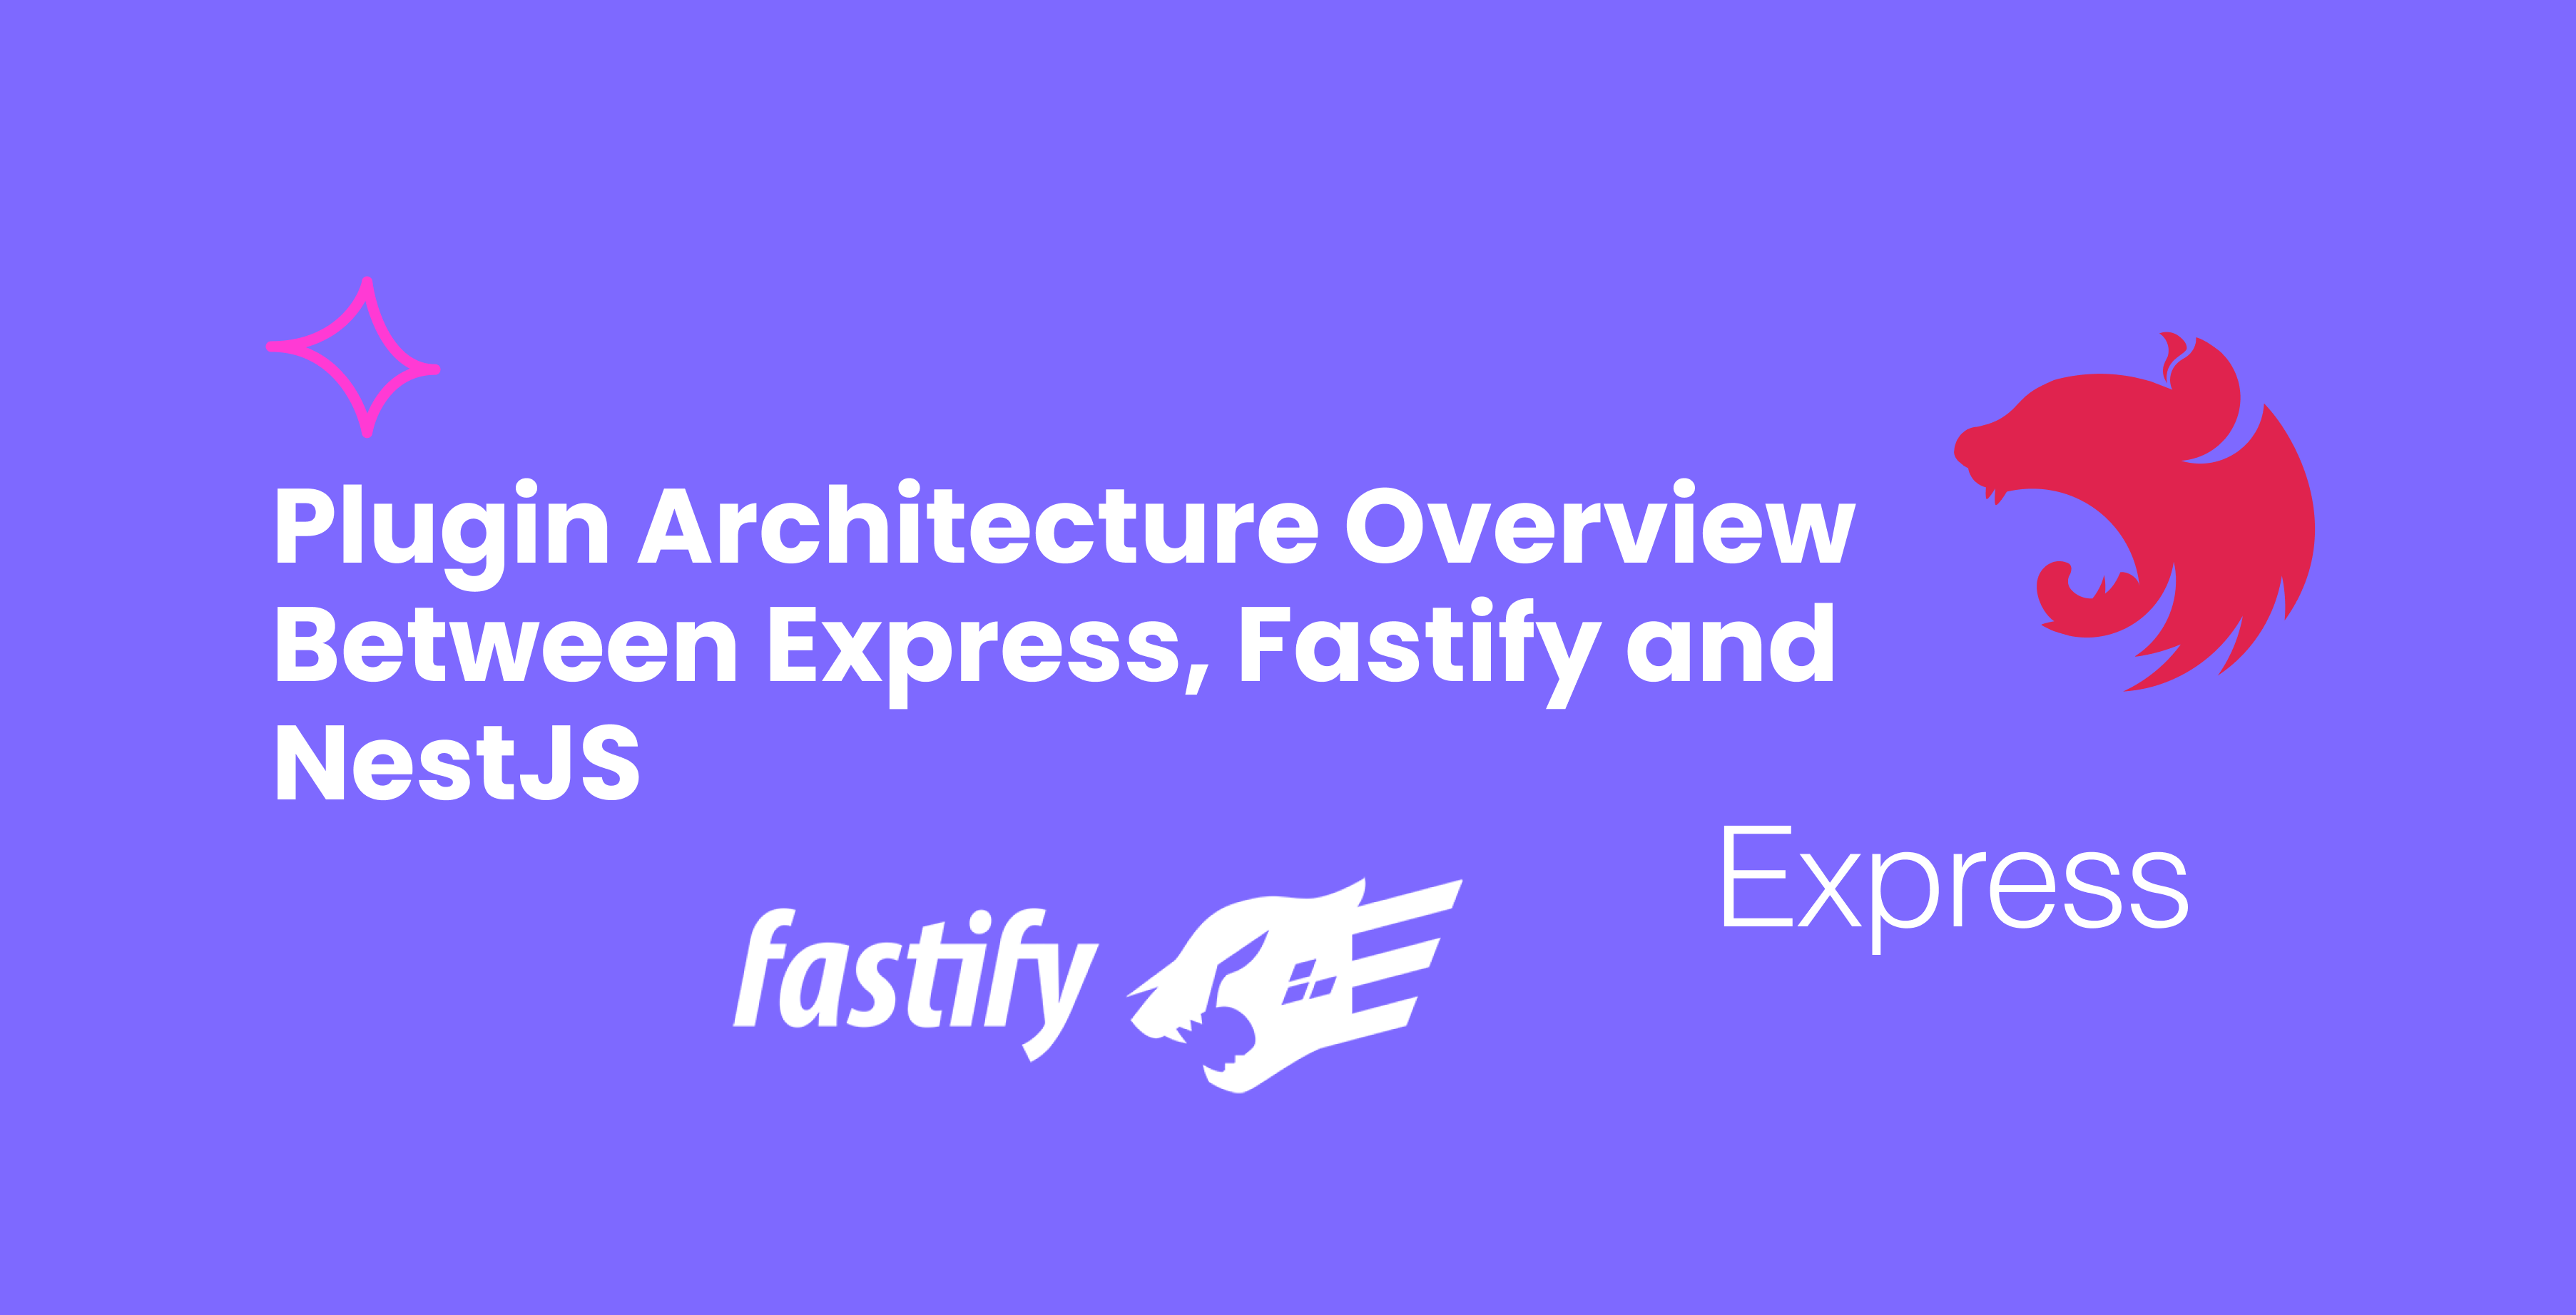 Plugin Architecture Overview Between Express, Fastify and NestJS